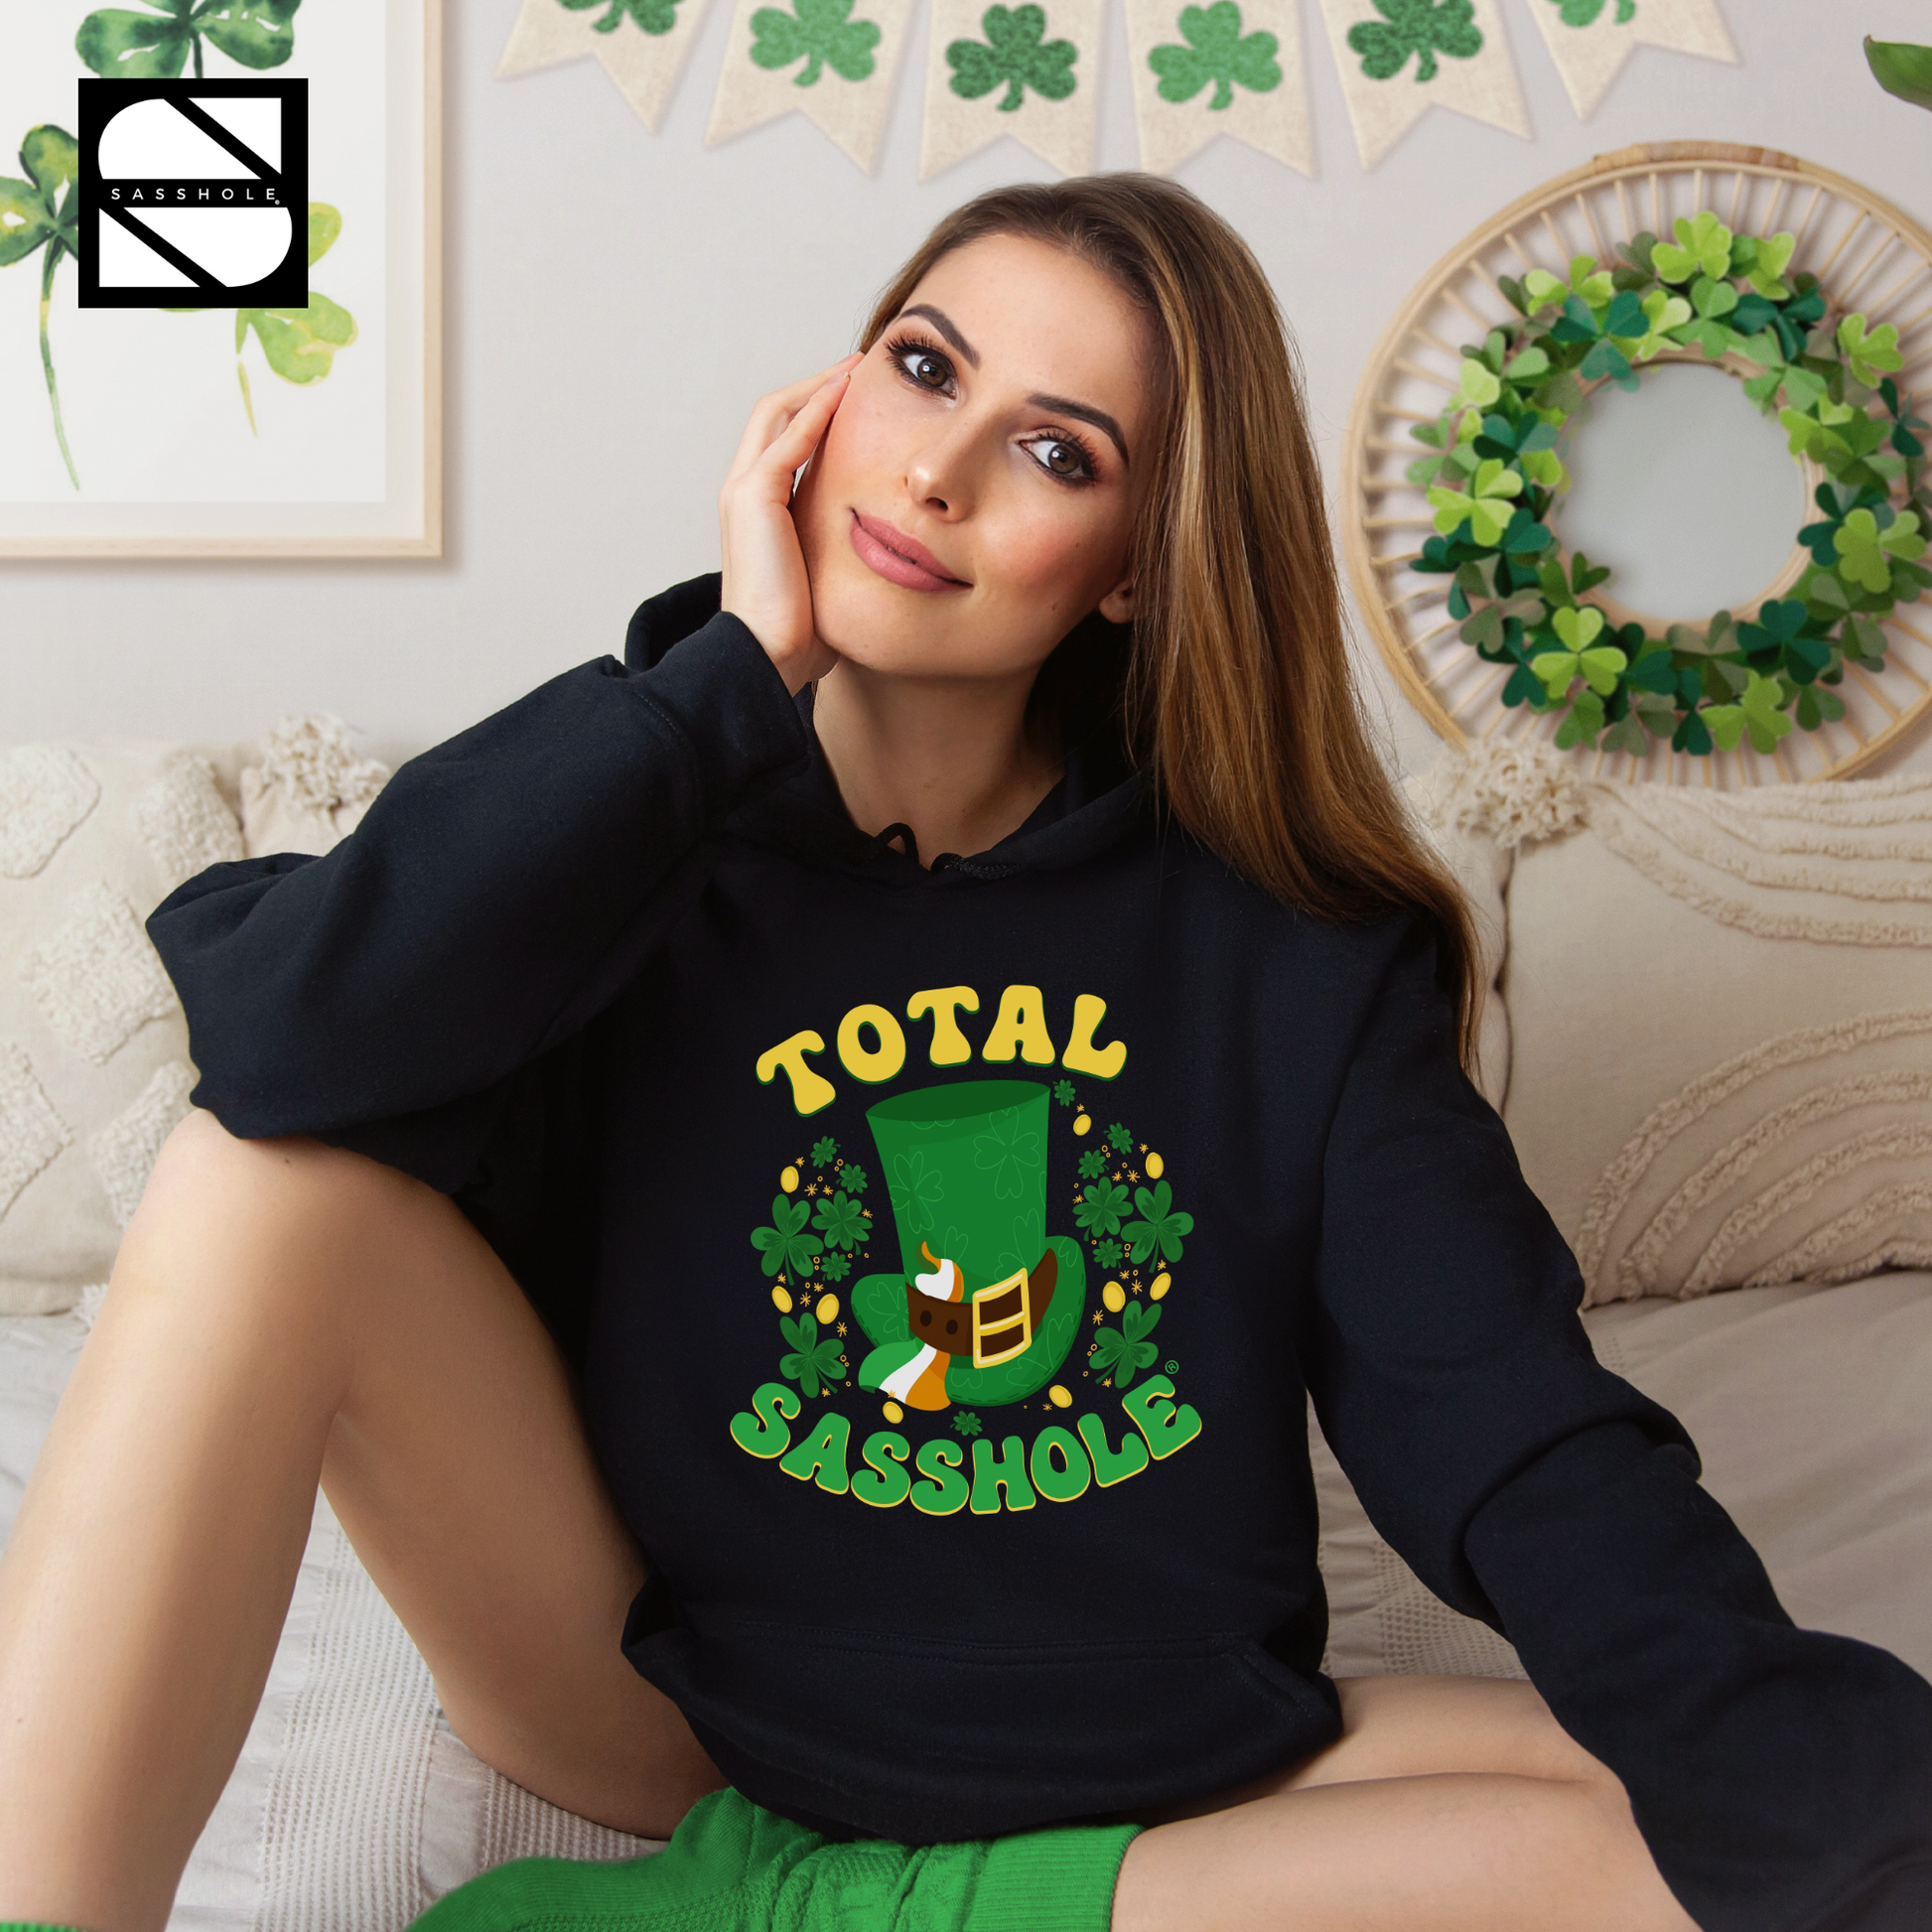 Women's St. Patrick's Day Hoodie, Women's Lucky Charm Tee, Women's Green and Cute Shirt, Women's Festive Green Hoodie, Women's Clothing, Women's Bold Green Attire, Unisex, Unique St. Patrick's Day Top, Unique St. Paddy's Day Hoodie, Trendy St. Paddy's Day Outfit, Trendy Irish Statement Wear, St. Patrick's Day Vibe Tee, St. Patrick's Day Shirt for Women, St. Patrick's Day Chic Fashion, St. Paddy's Day Swagger Wear, St. Paddy's Day Statement Wear, St. Paddy's Day Fun Tee